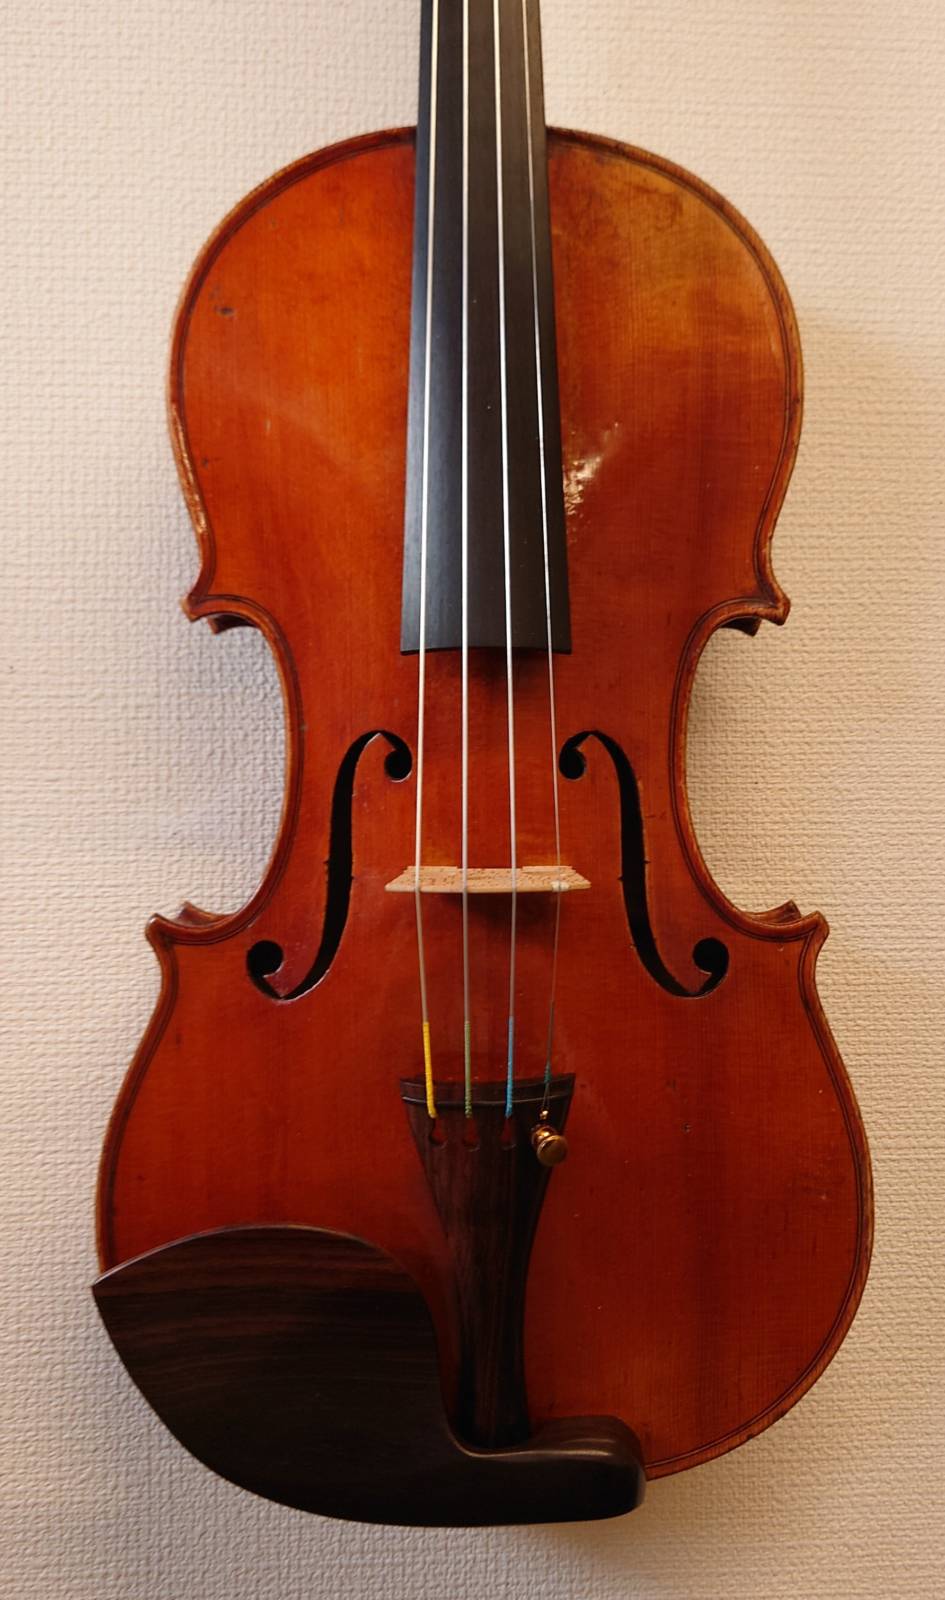 French violin Emile Miquel a mirecourt Expositions Universall cf 1891